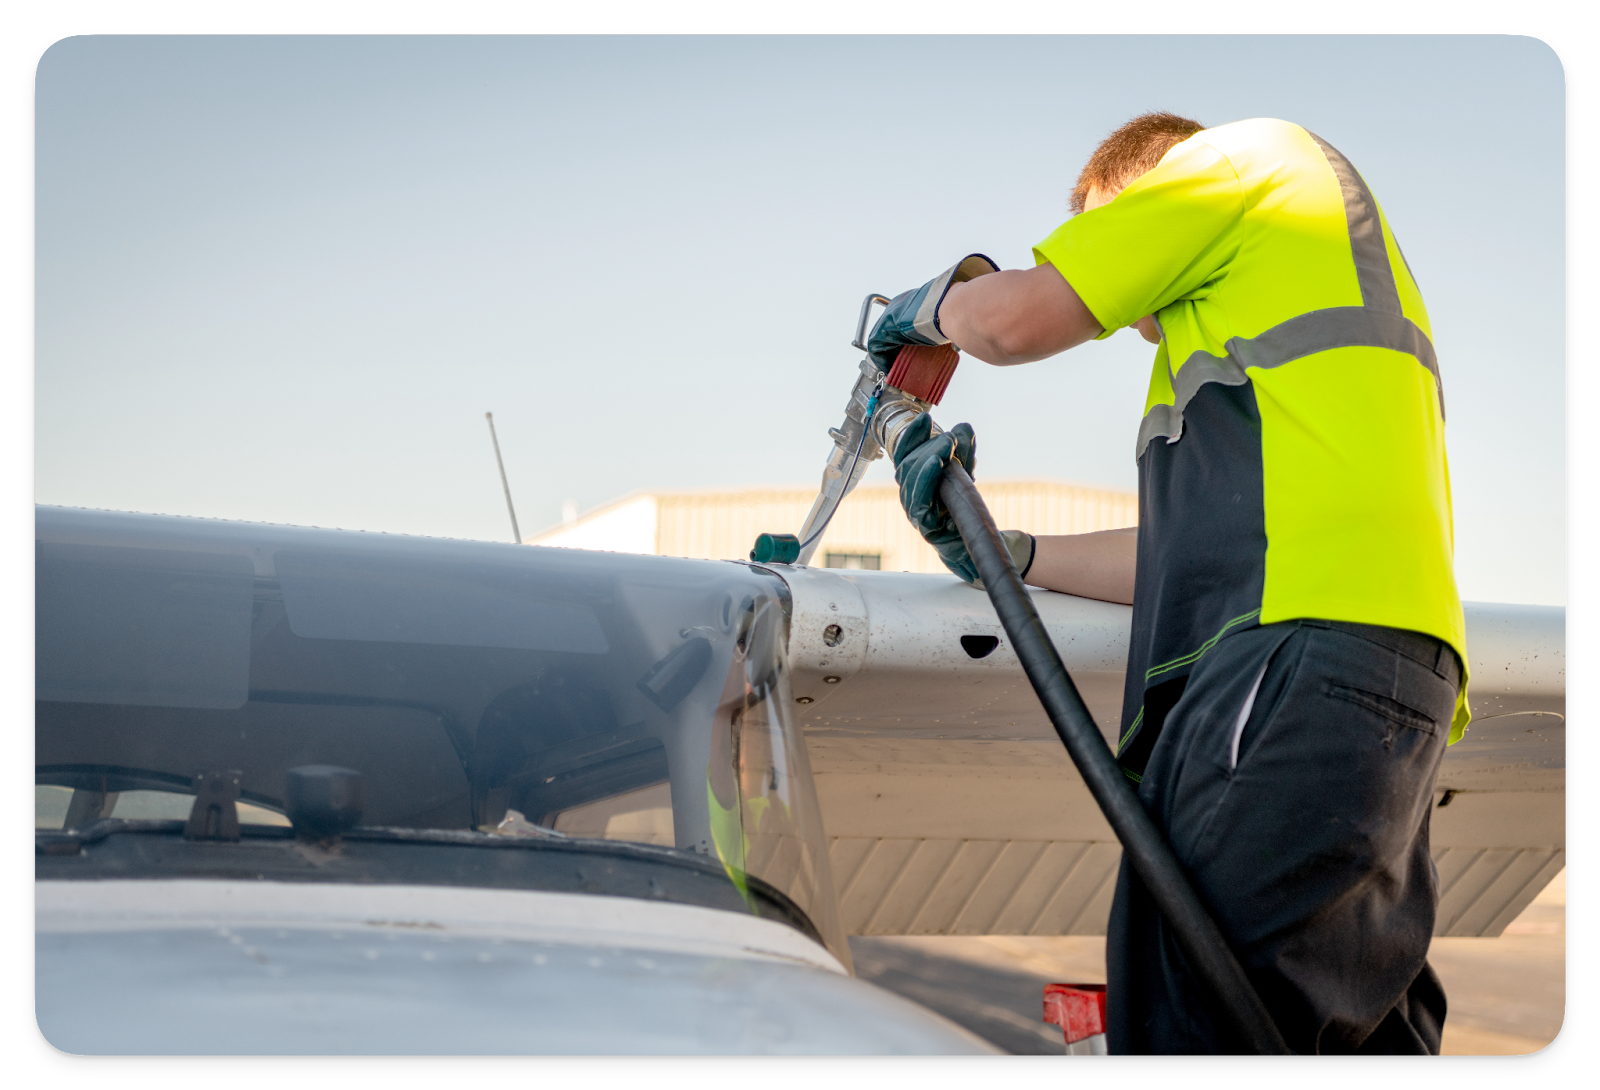 A pilot refueling their airplane.